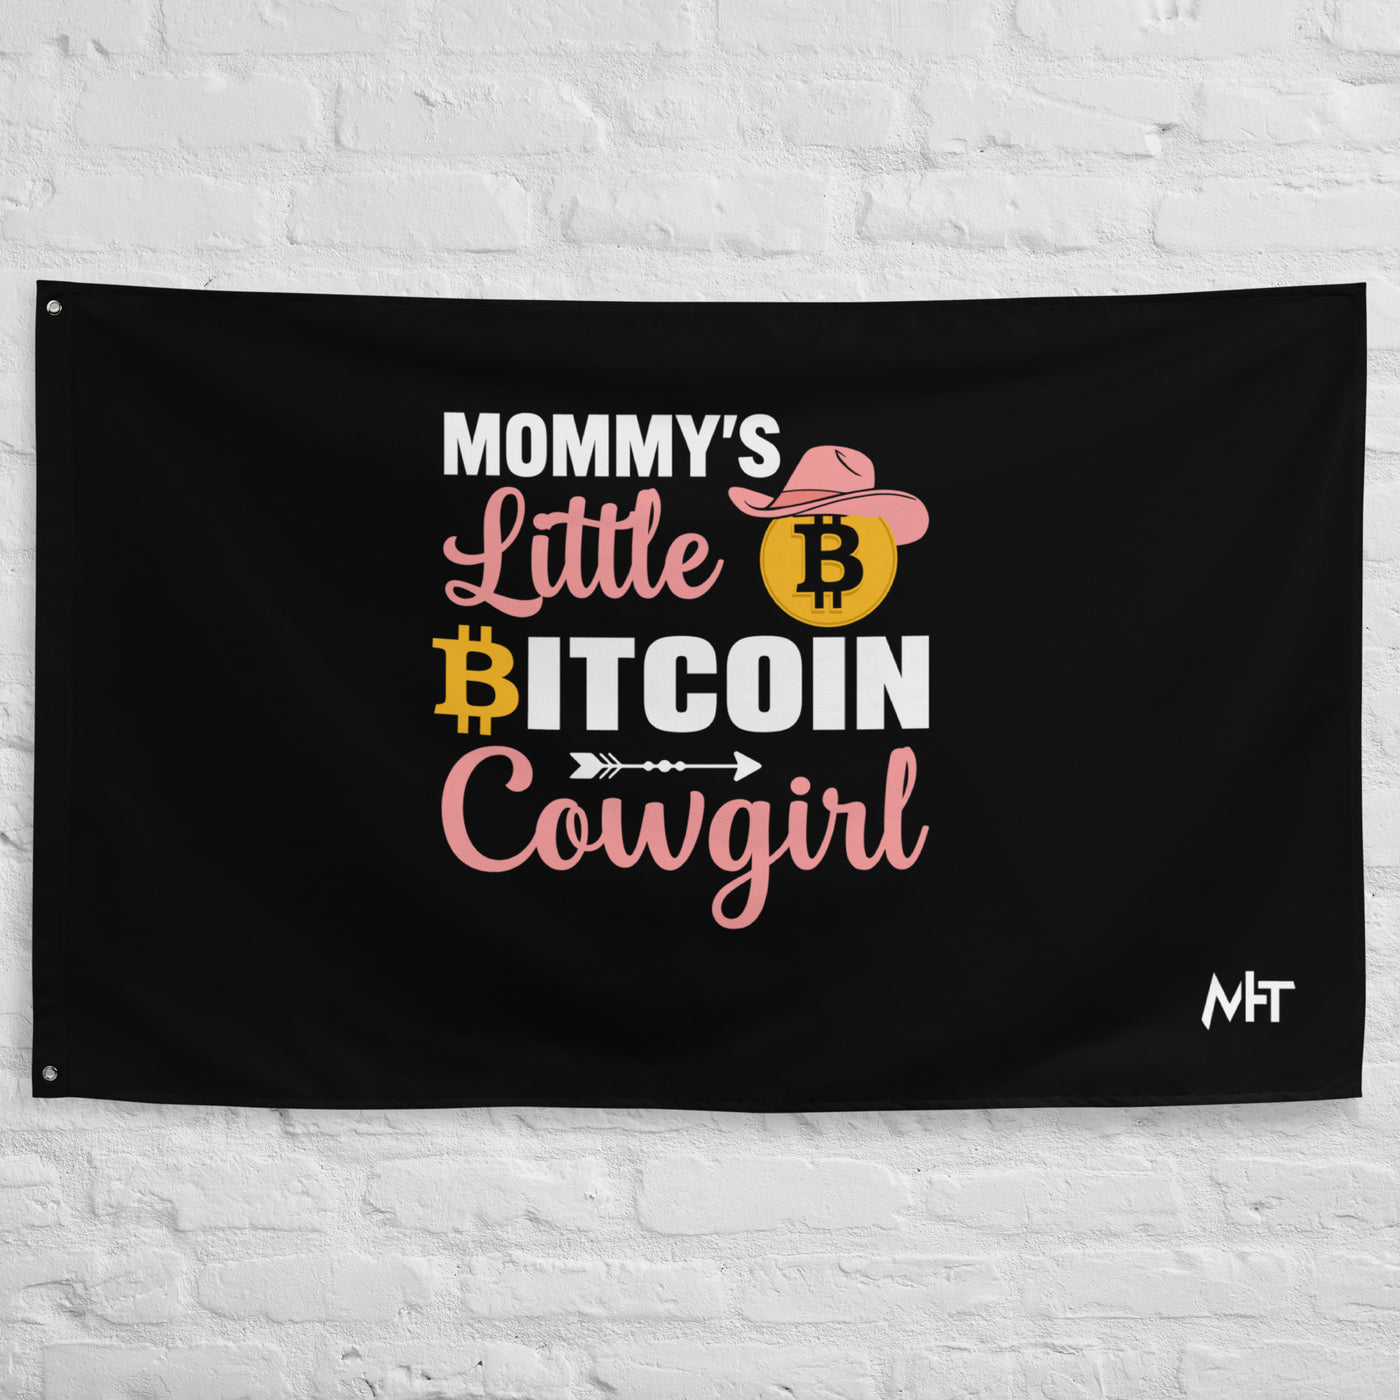 Mommy's Little Bitcoin Cowgirl - video game Flag